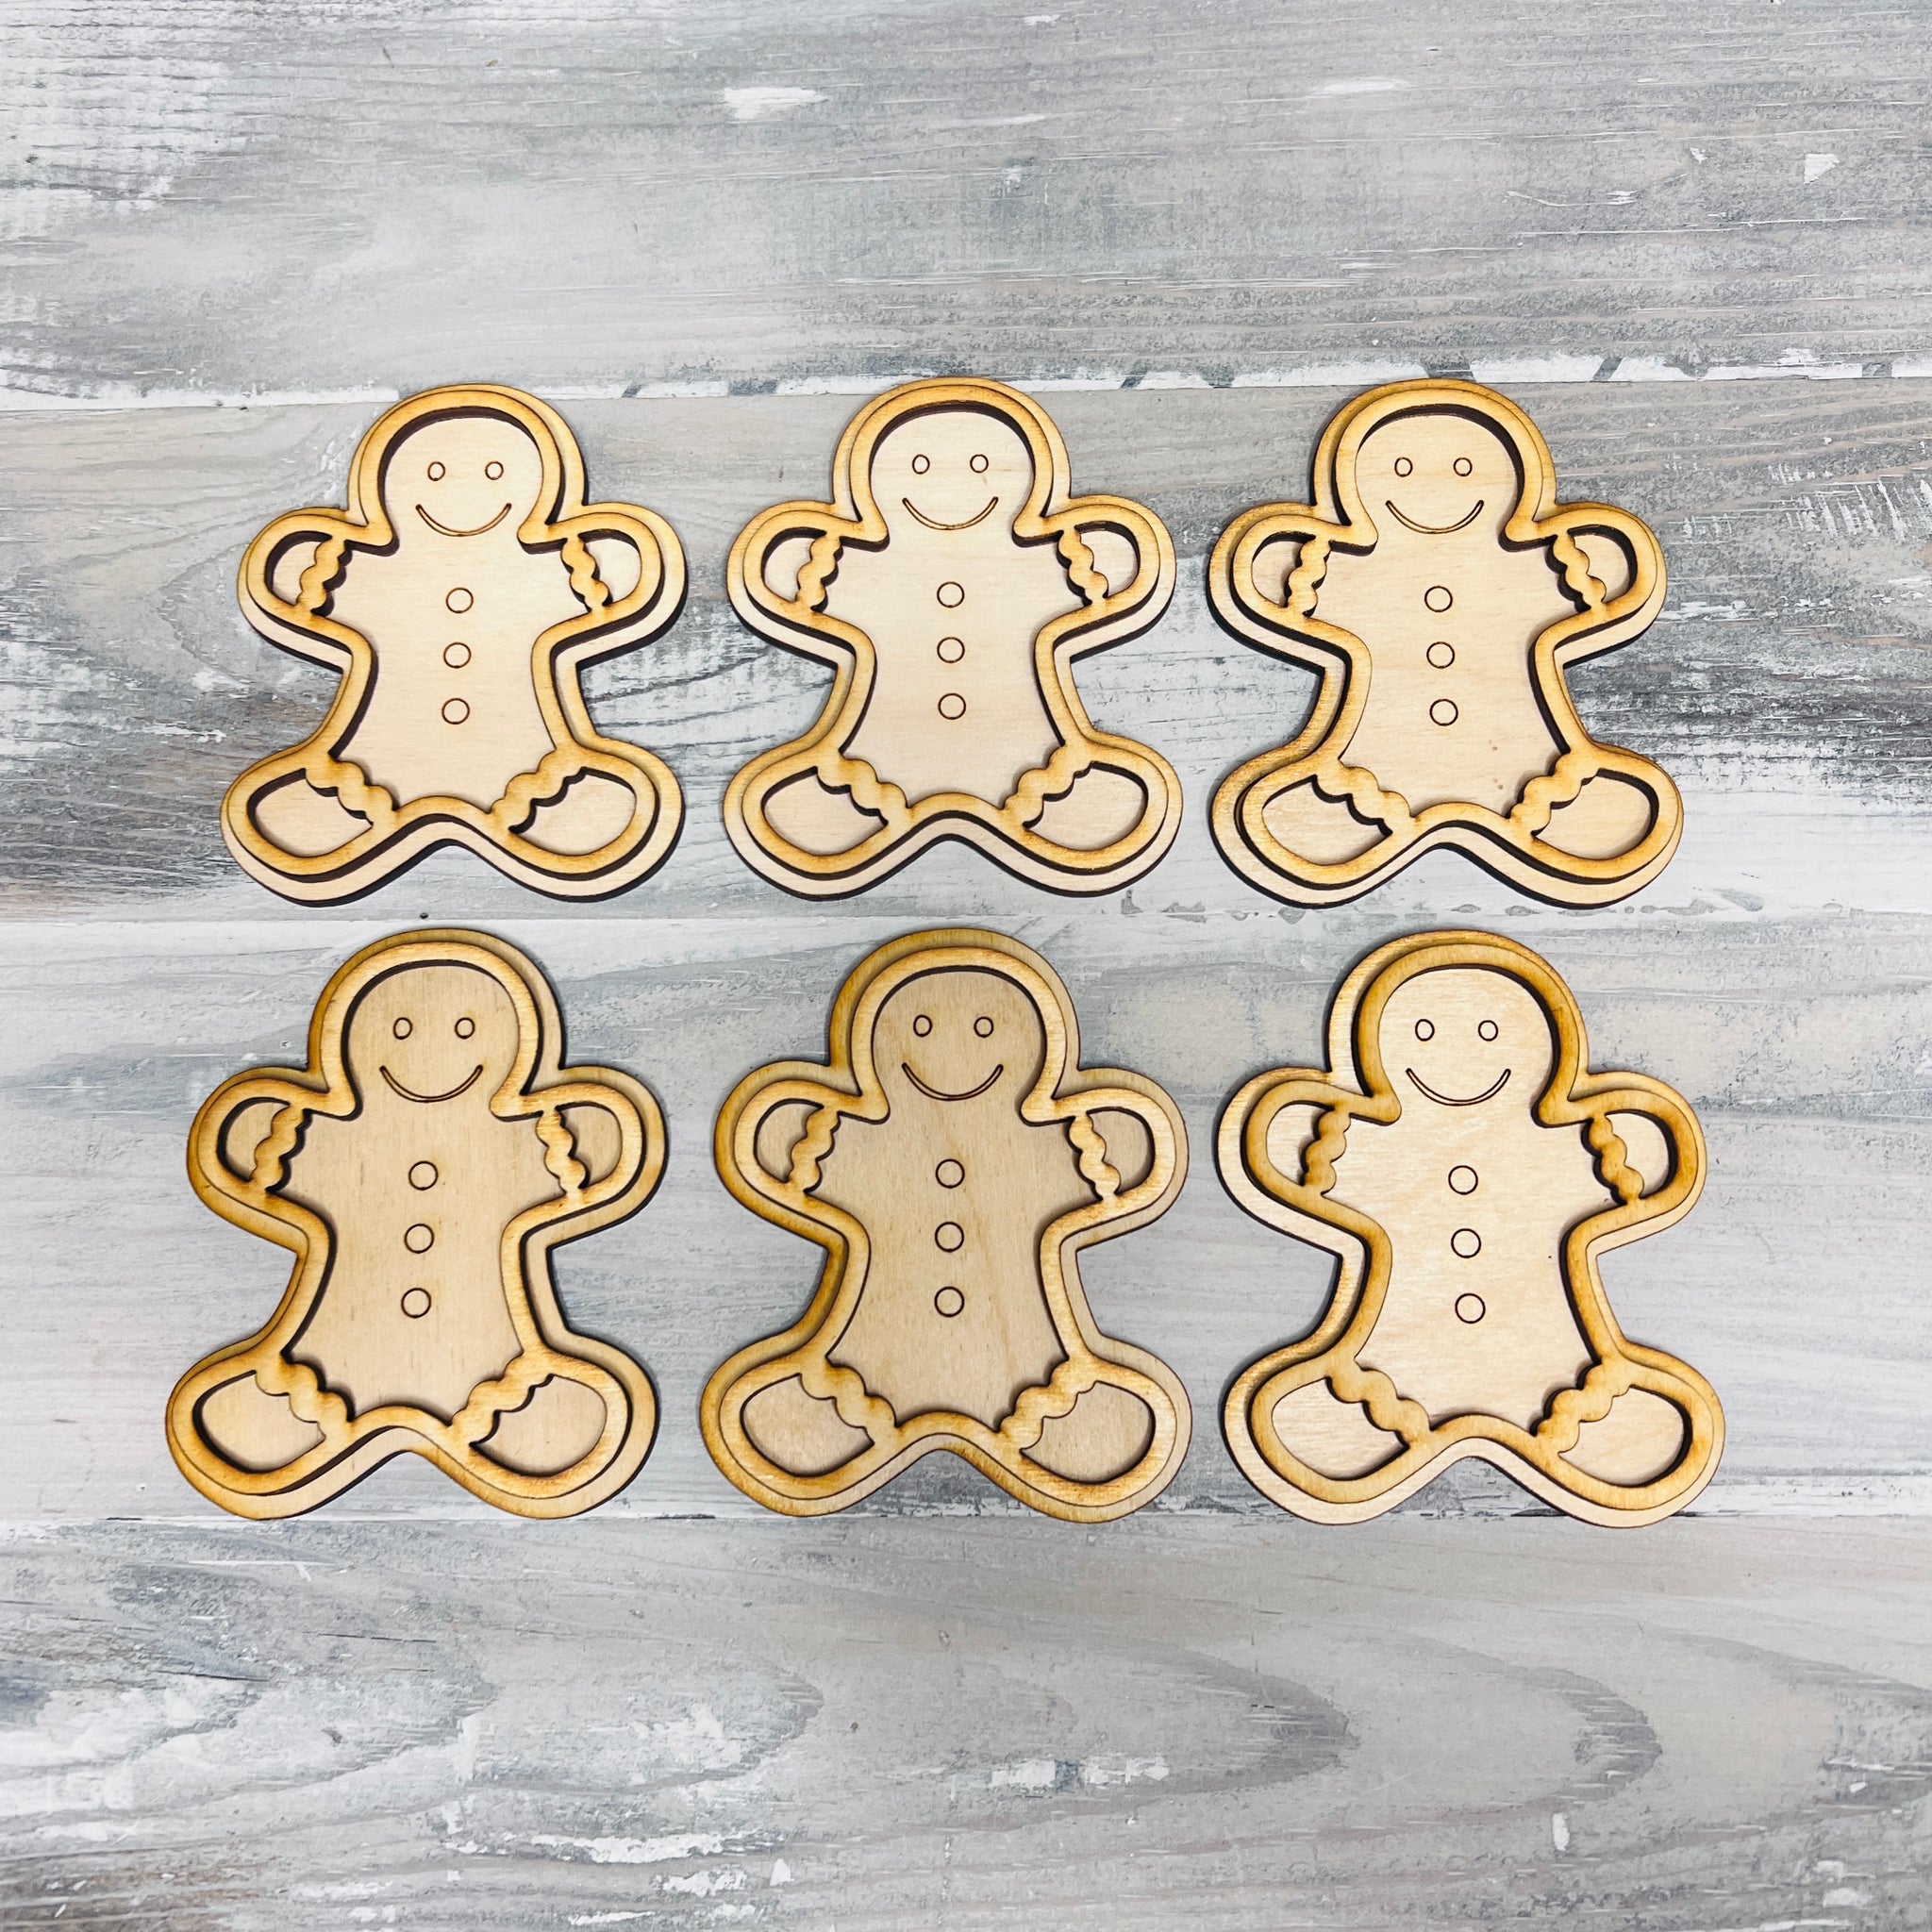 Set of 6 Unfinished Gingerbread Men with Overlay - Free Shipping